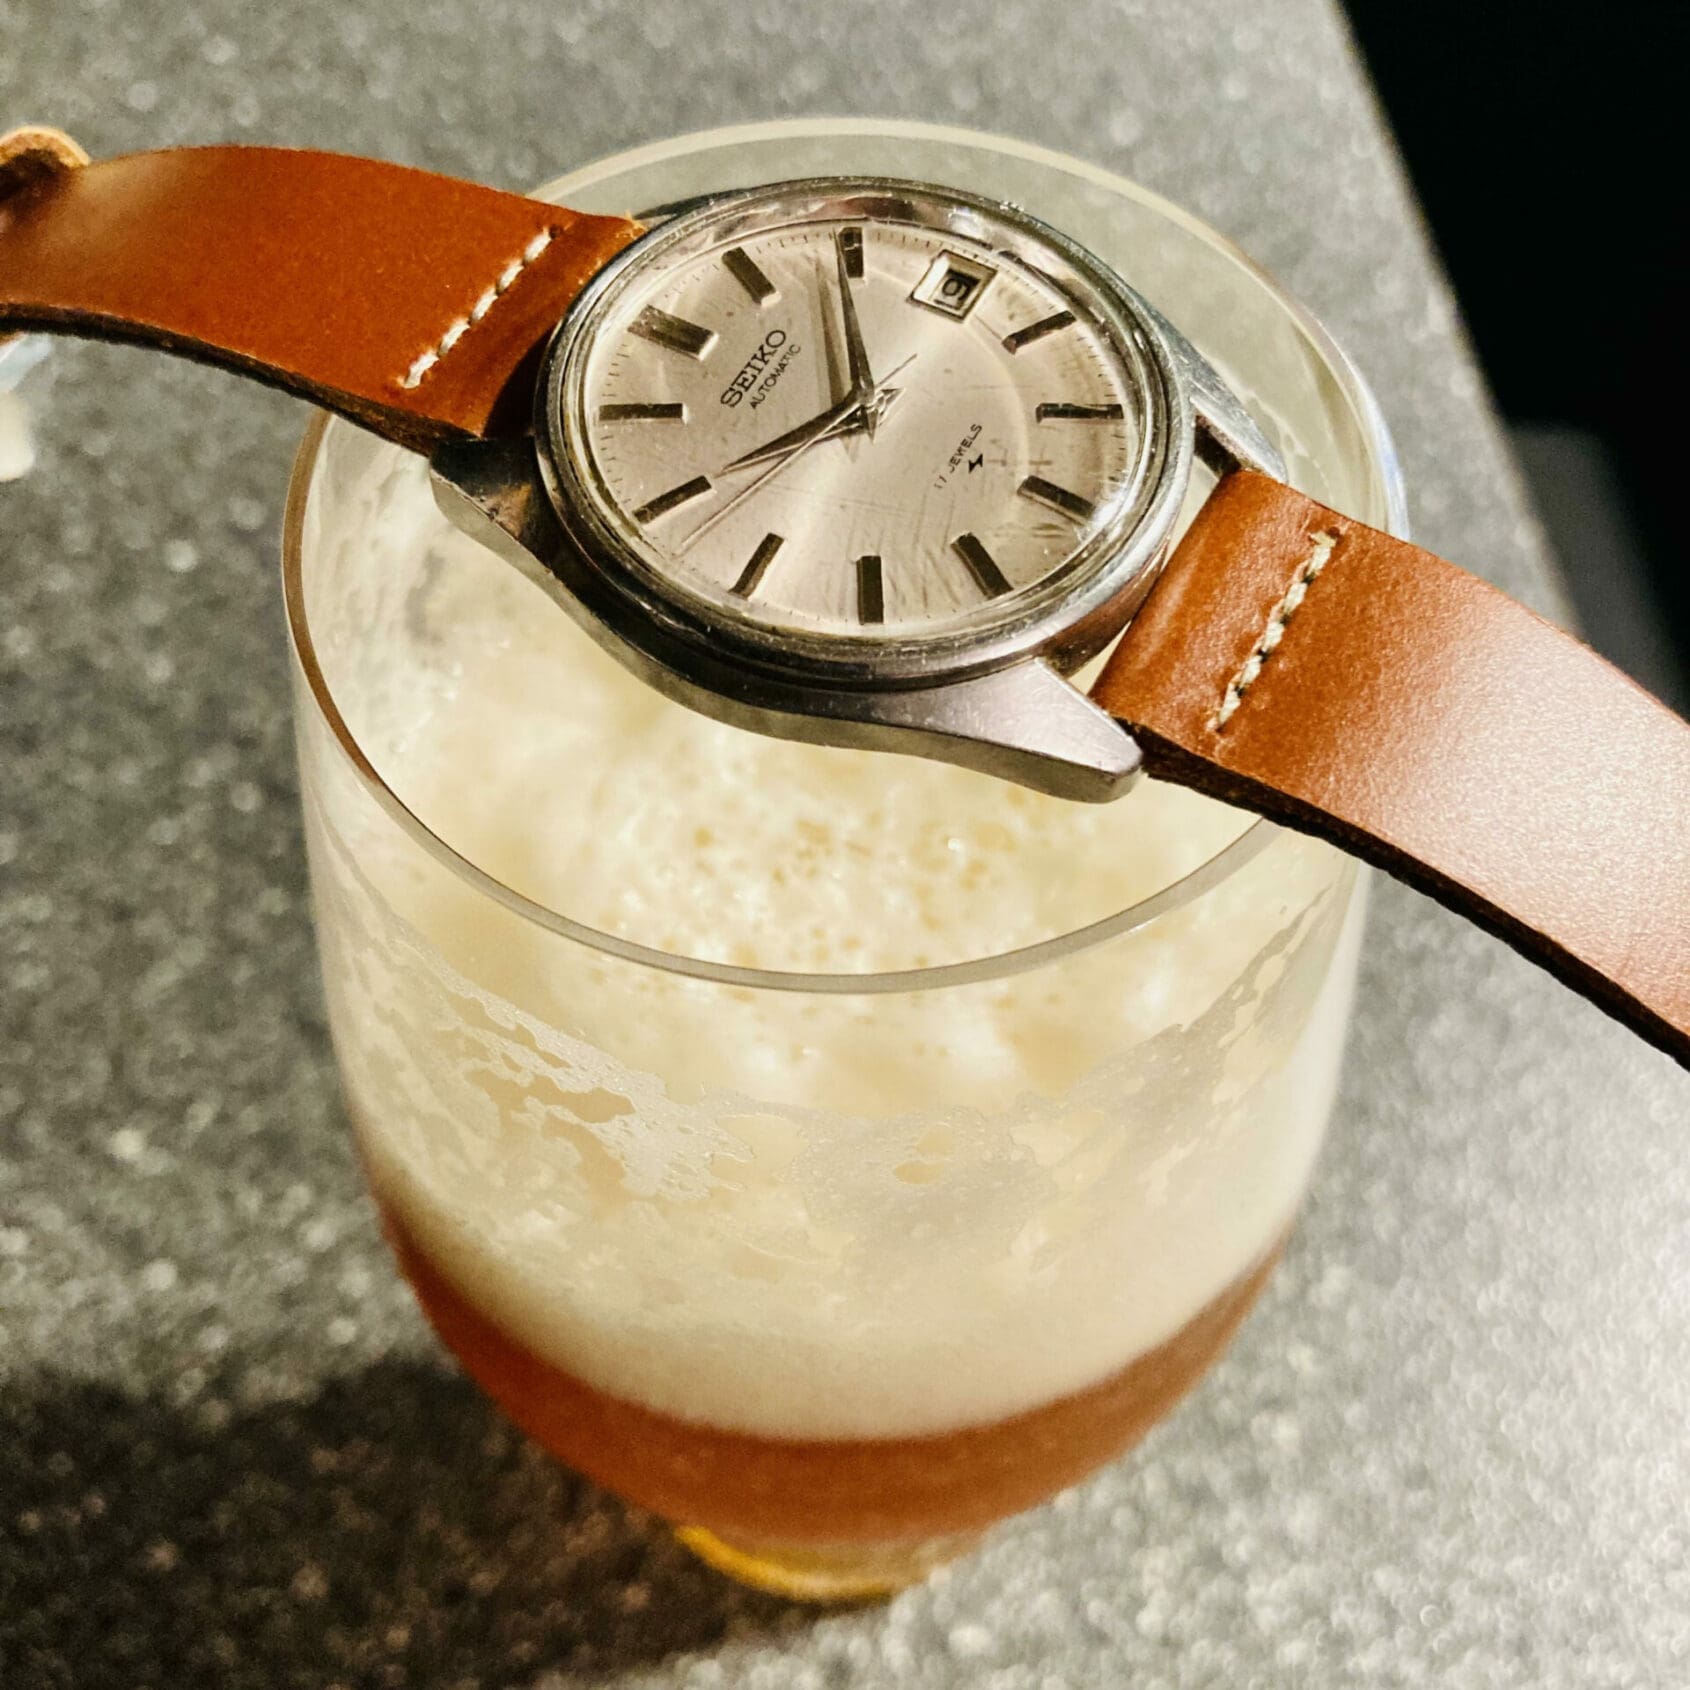 It’s 5 o’clock somewhere: My ill-advised quest to pair beer with watches